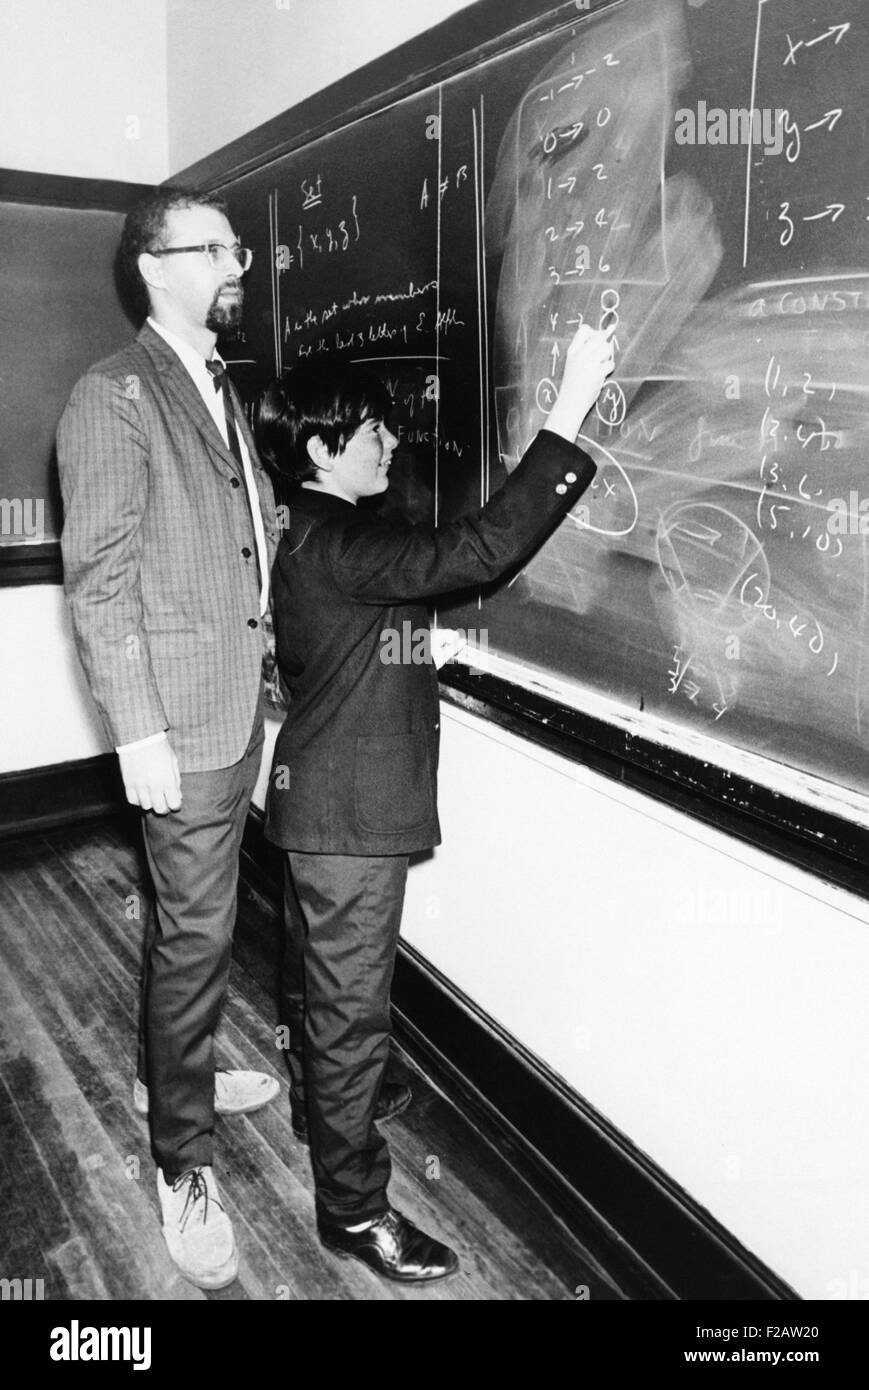 Professor Harry Dym, works with his 12 year old student, Matthew Marcus at New York City College. Sept. 16, 1968. Dym's research included operator theory, interpolation theory, and inverse problems. He discovered the 'Dym equation', which was named after him. (CSU 2015 11 1487) Stock Photo